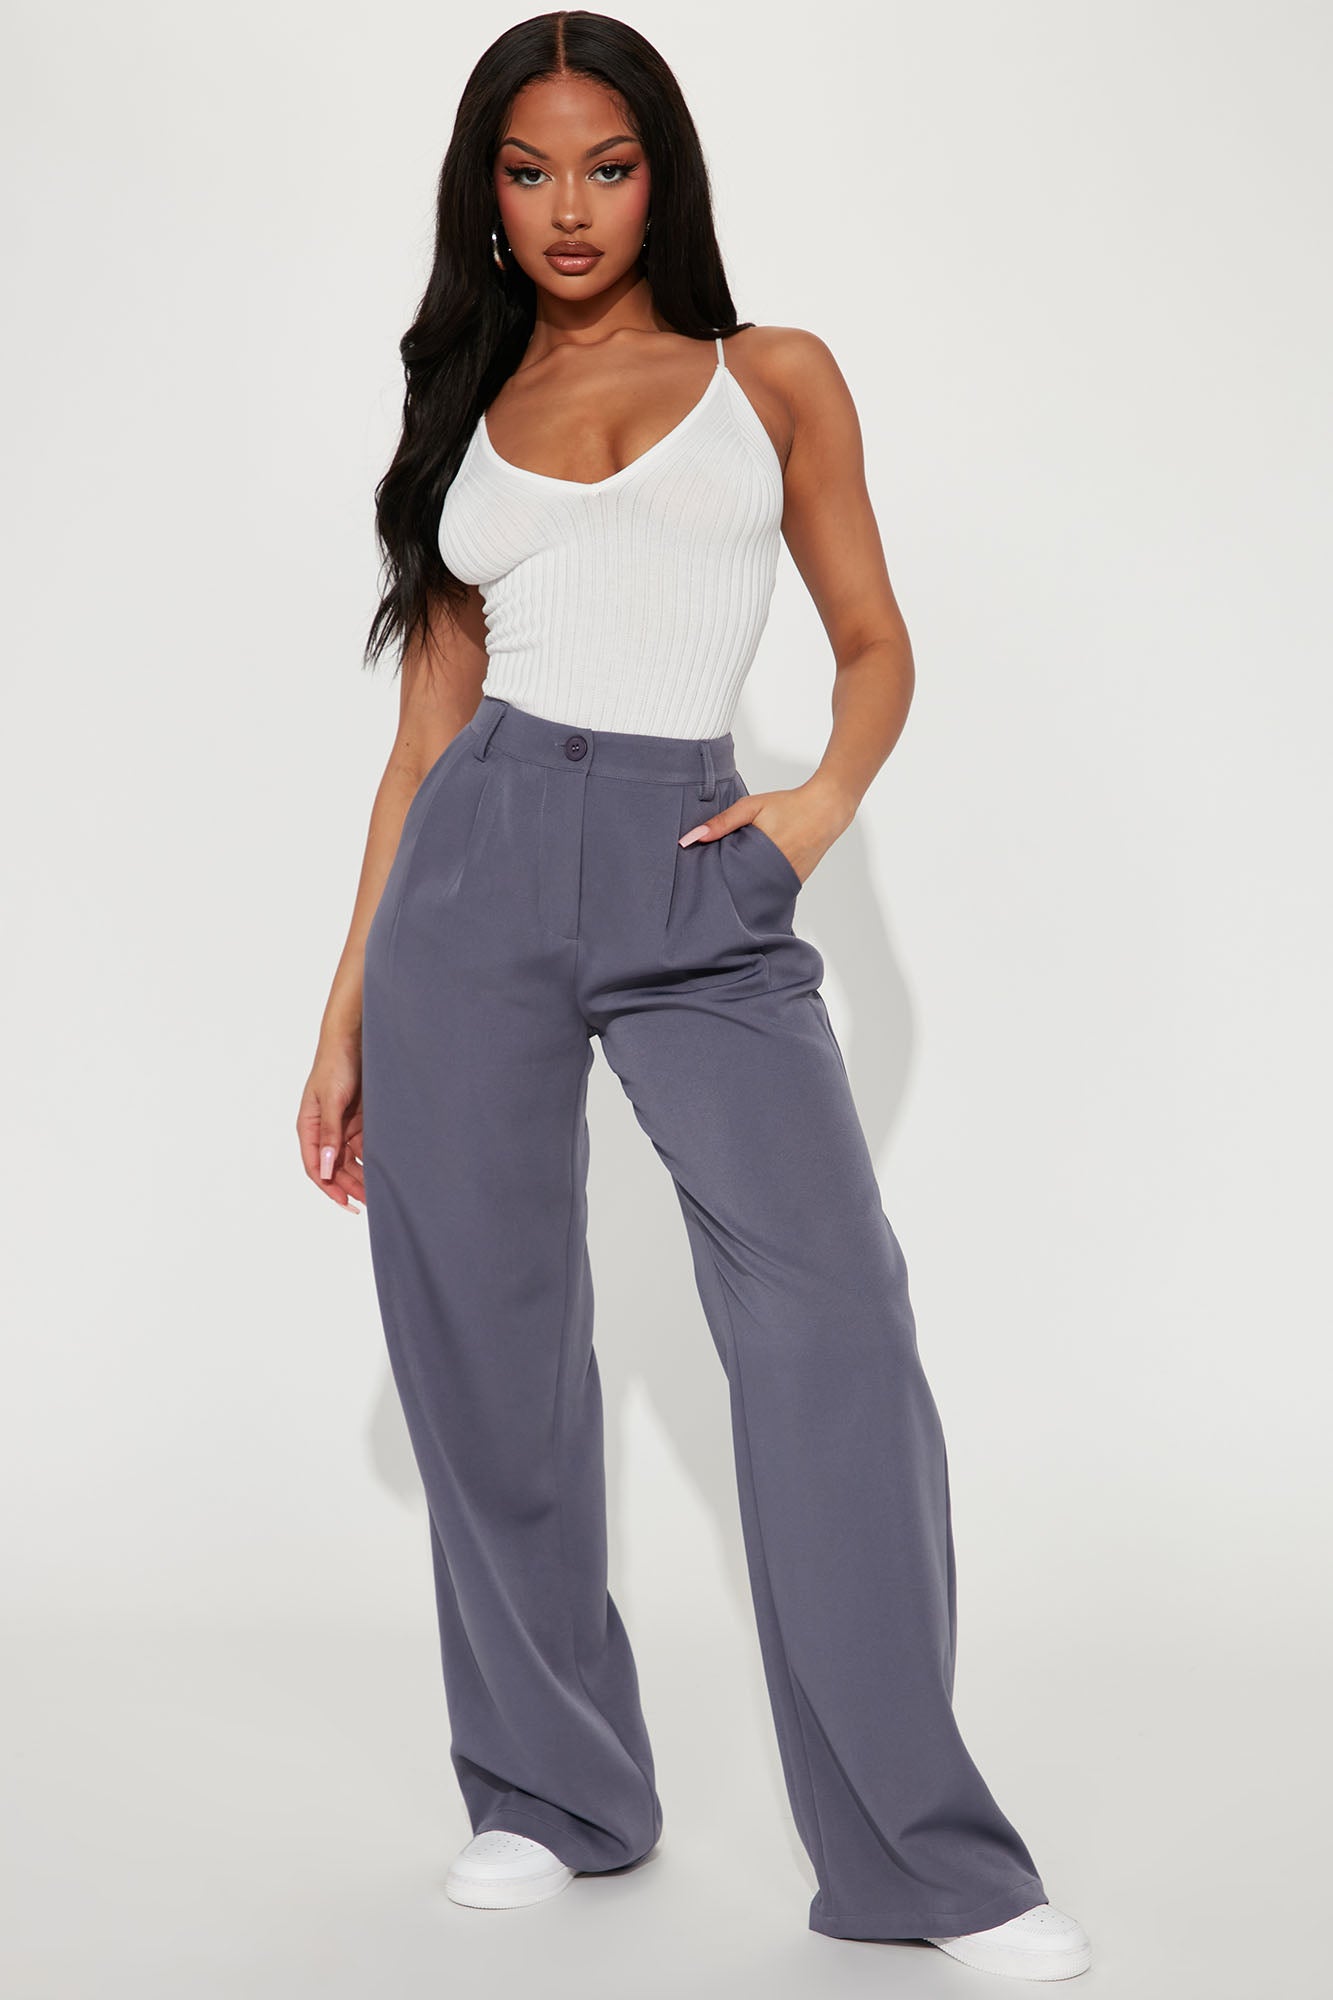 Beige Trousers - Pull-On Trousers - Beige High Waisted Pants - Lulus